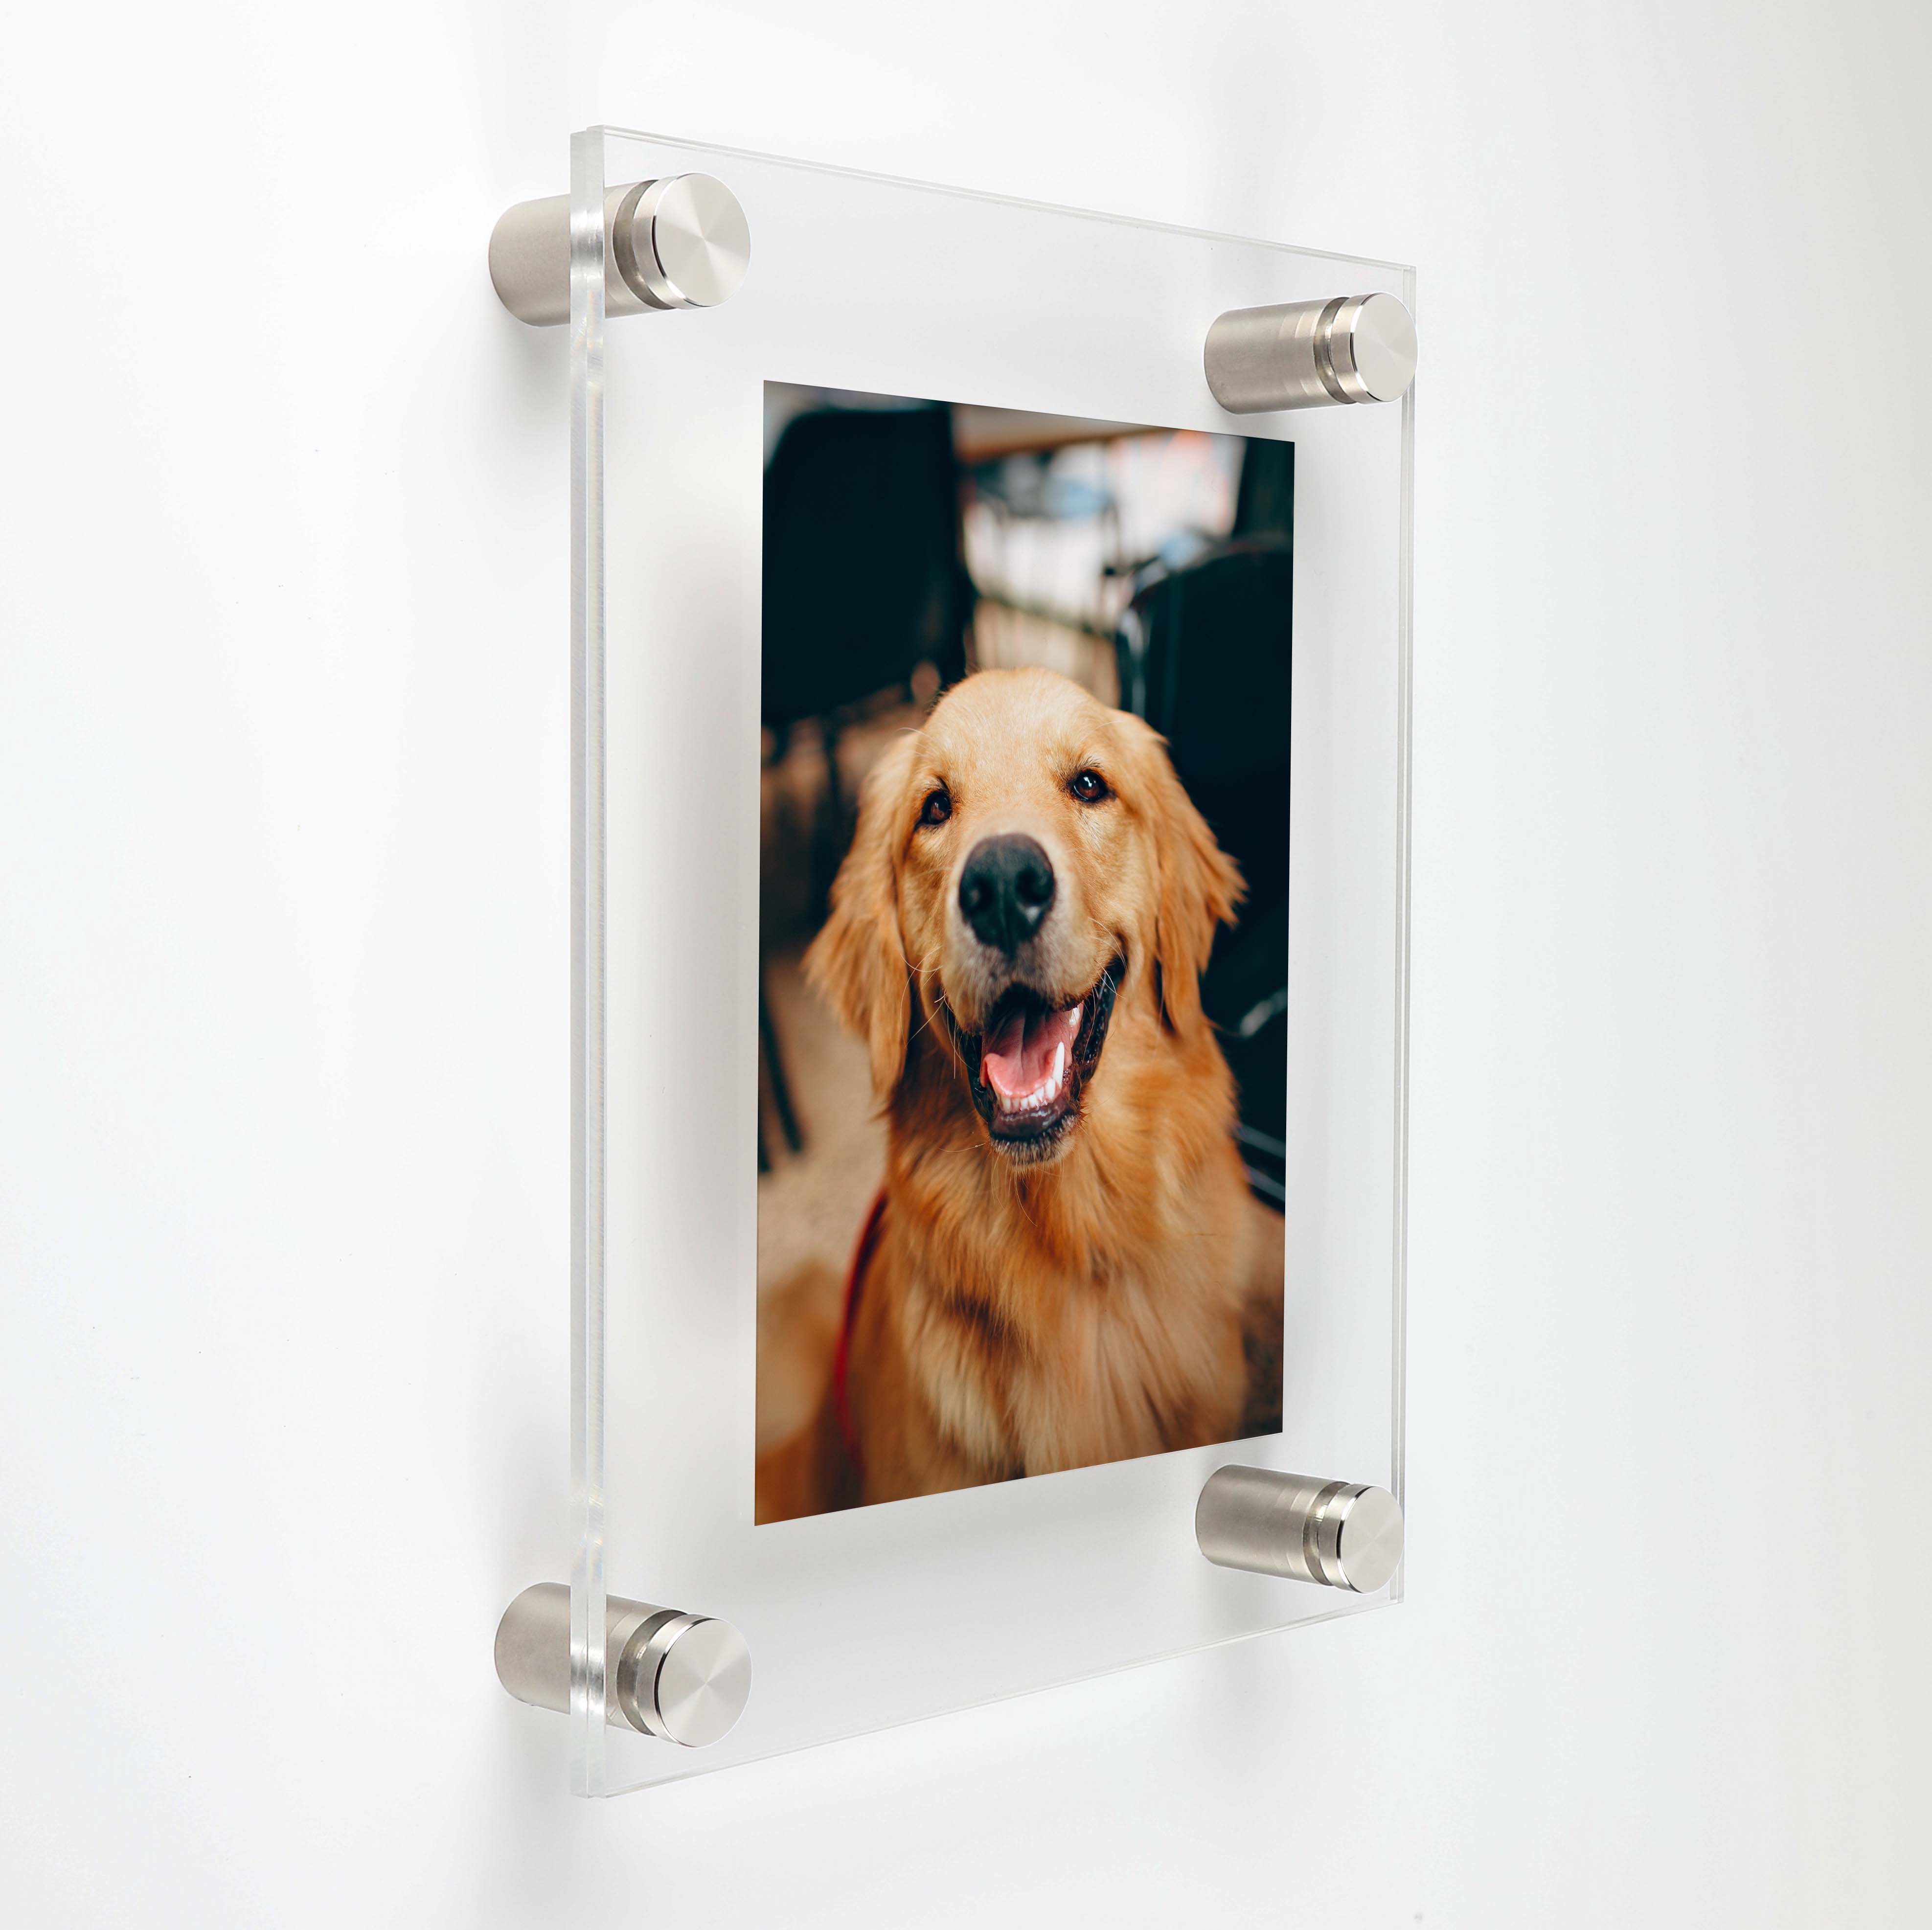 (2) 23-3/4'' x 29-3/4'' Clear Acrylics , Pre-Drilled With Polished Edges (Thick 3/16'' each), Wall Frame with (4) 5/8'' x 3/4'' Brushed Stainless Steel Standoffs includes Screws and Anchors